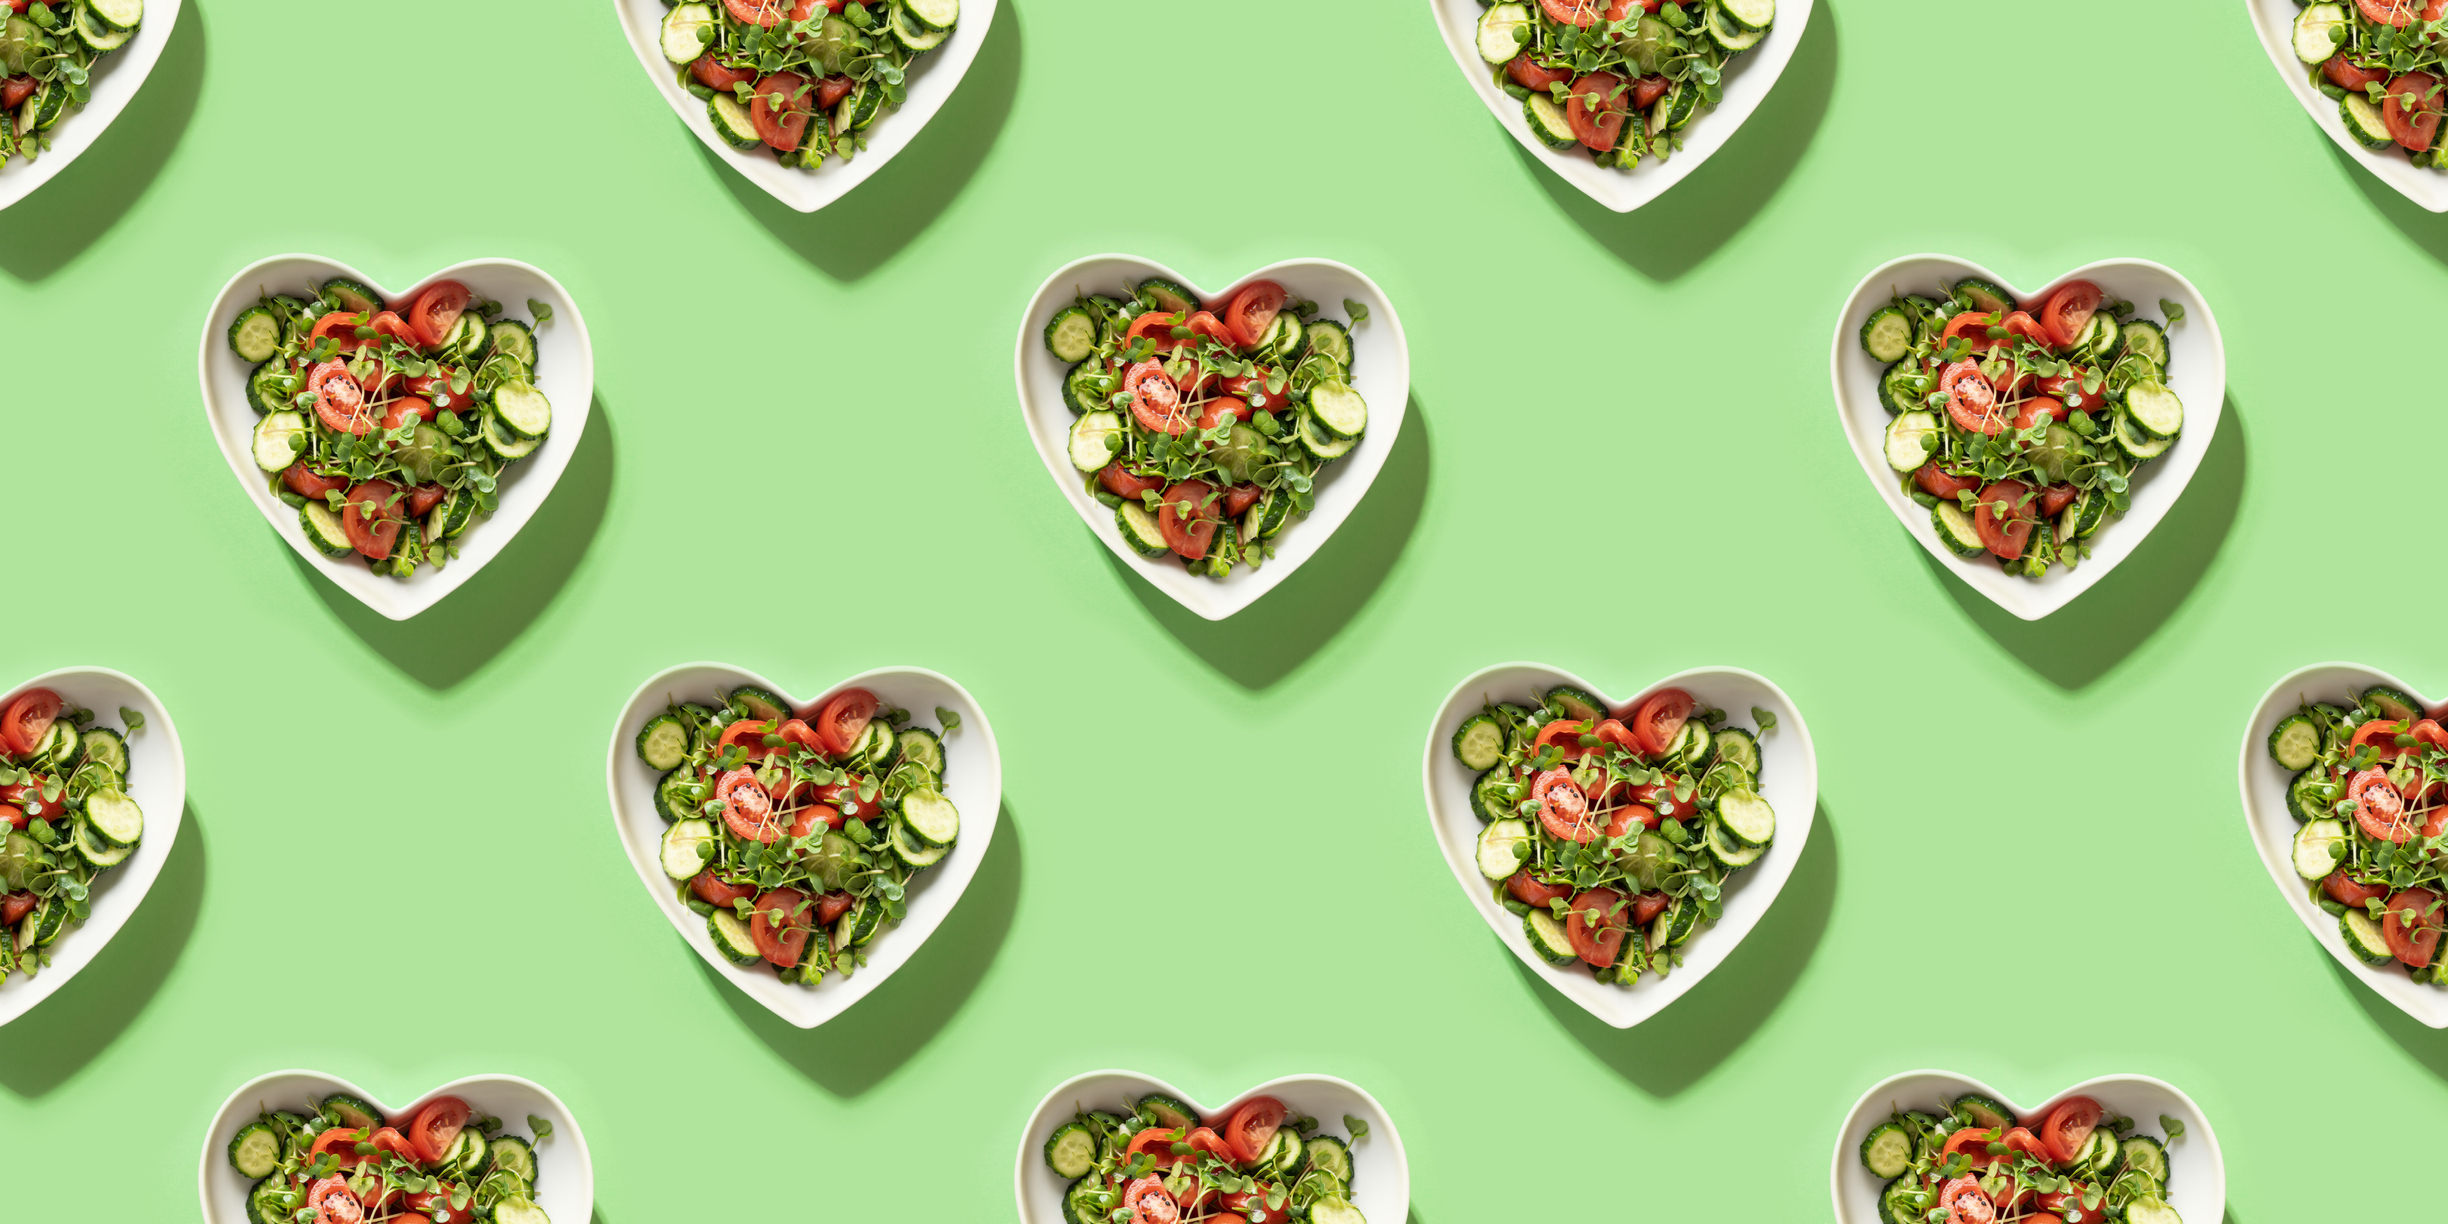 How much do plant-based foods protect your heart? Here are the numbers